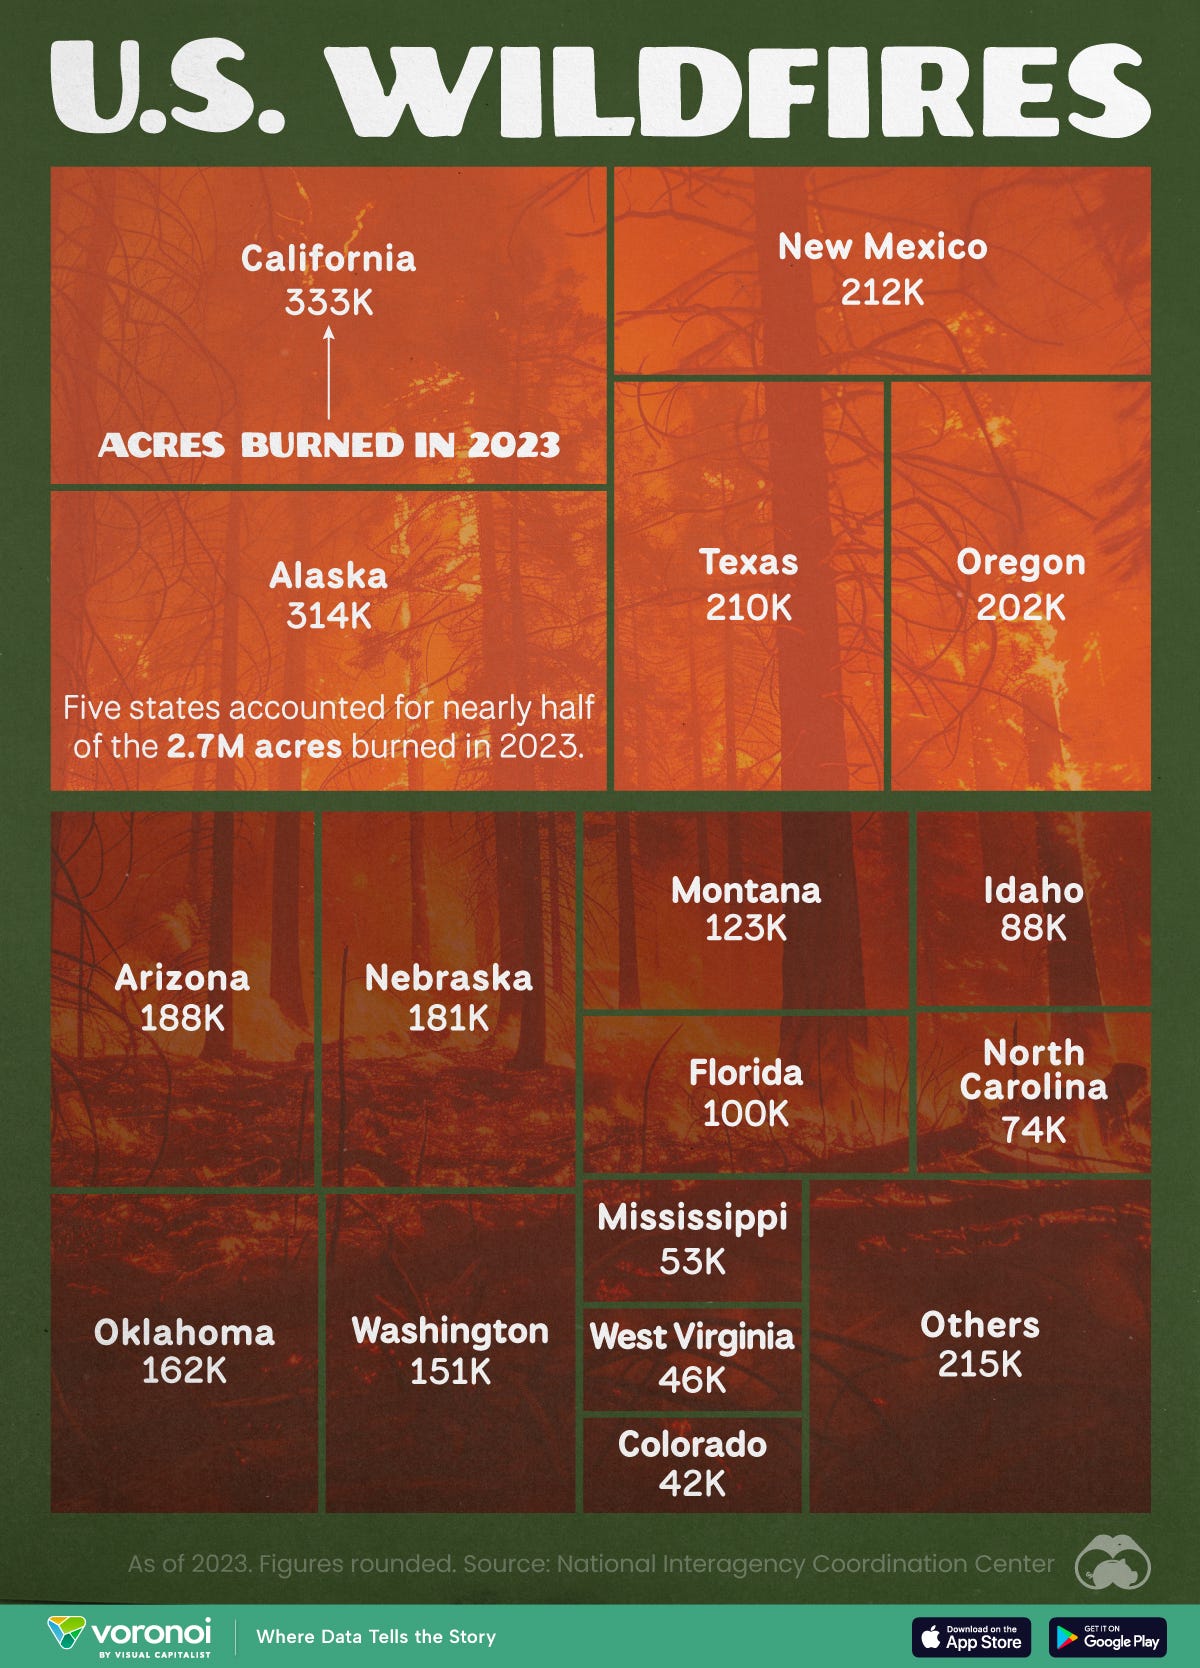 A chart with the total area burned by wildfires in 2023, by state, based on figures from the National Interagency Coordination Center.